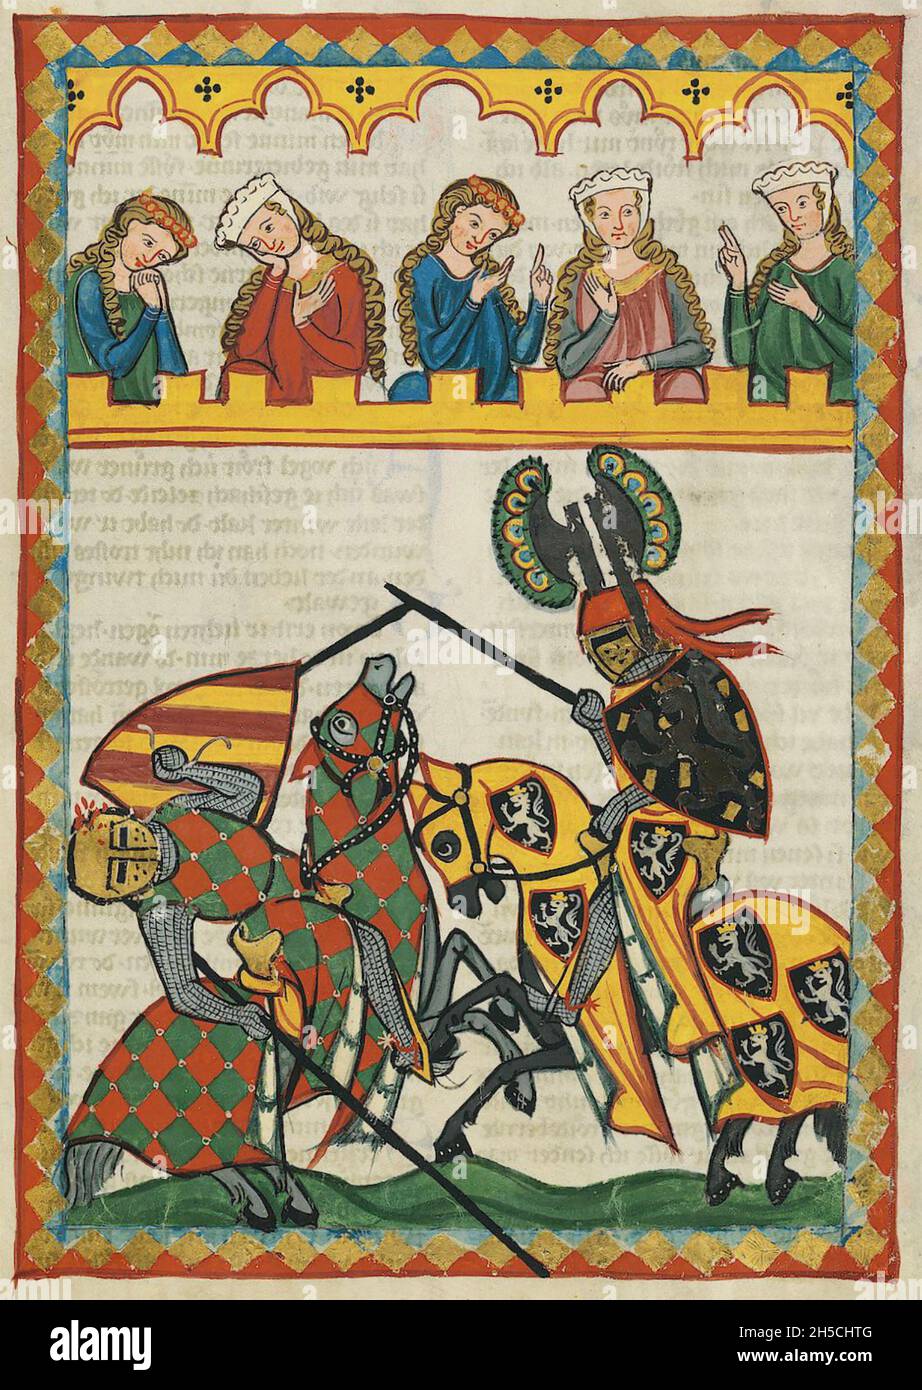 CODEX MANESSE An early to middle 14th century German manuscript containing songs and illustrating medieval life.Cpuryt ladies watch a tournament. Stock Photo